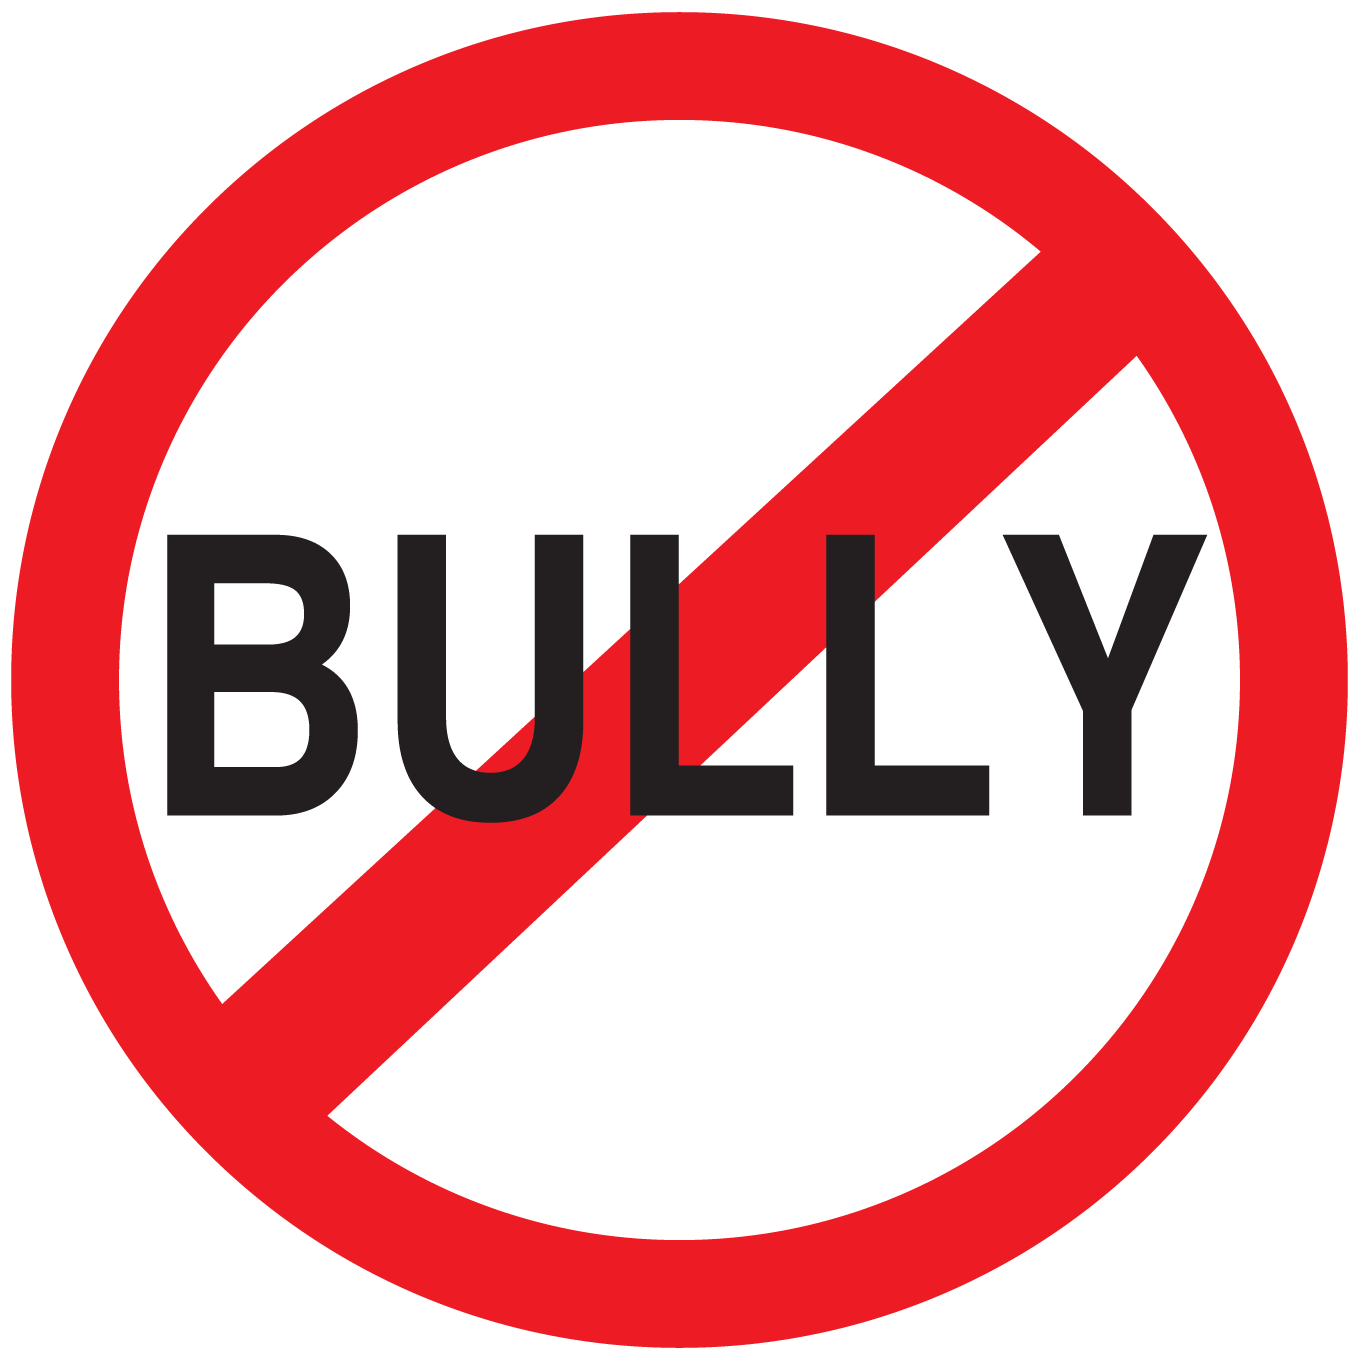 Bullying Pictures Clip Art - Viewing Gallery